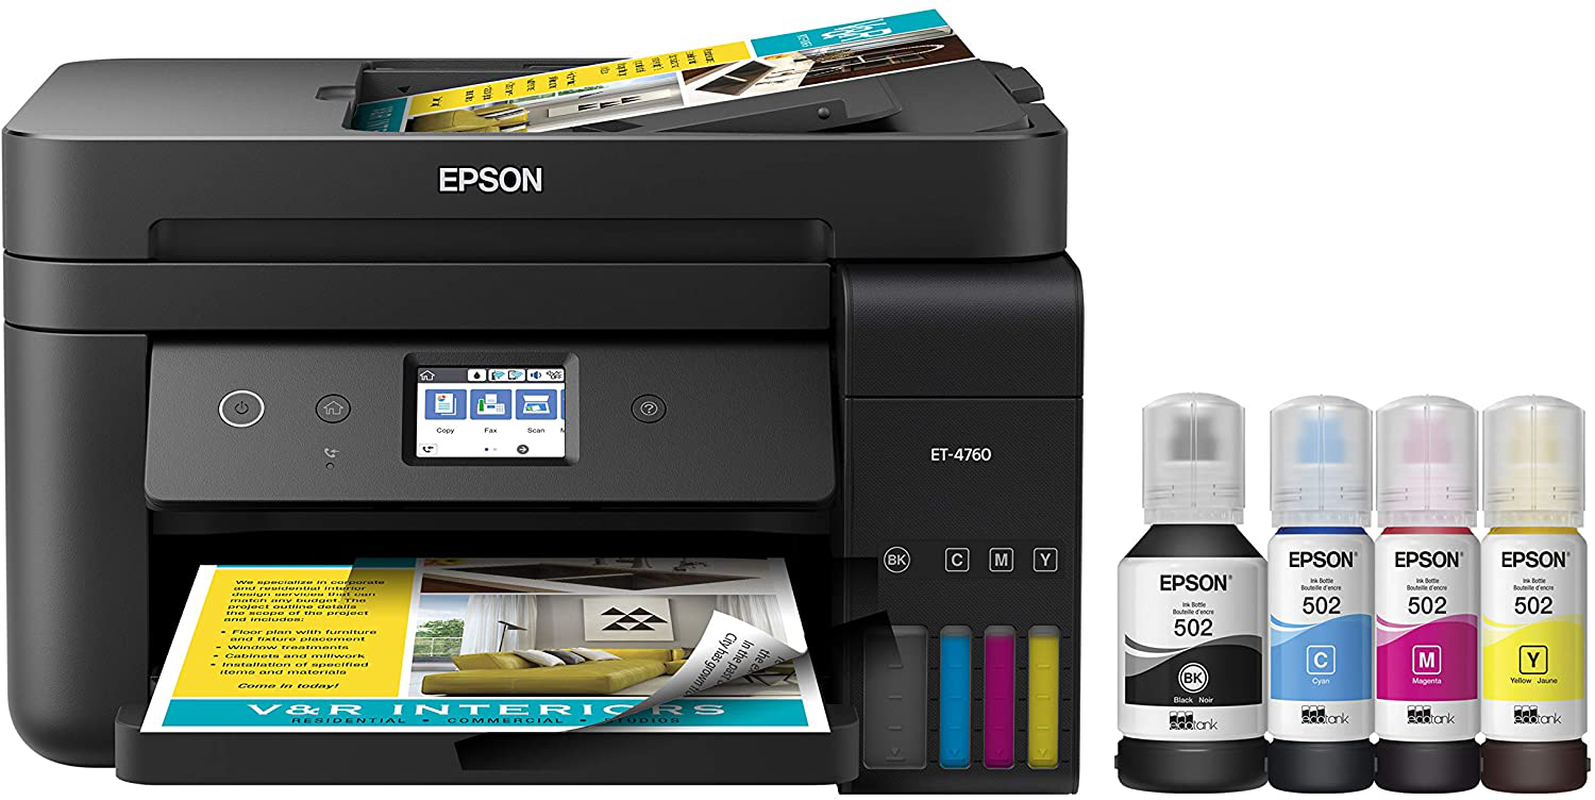 Epson Ecotank Et 2760 Wireless Color All In One Cartridge Free Supertank Printer With Scanner 1731